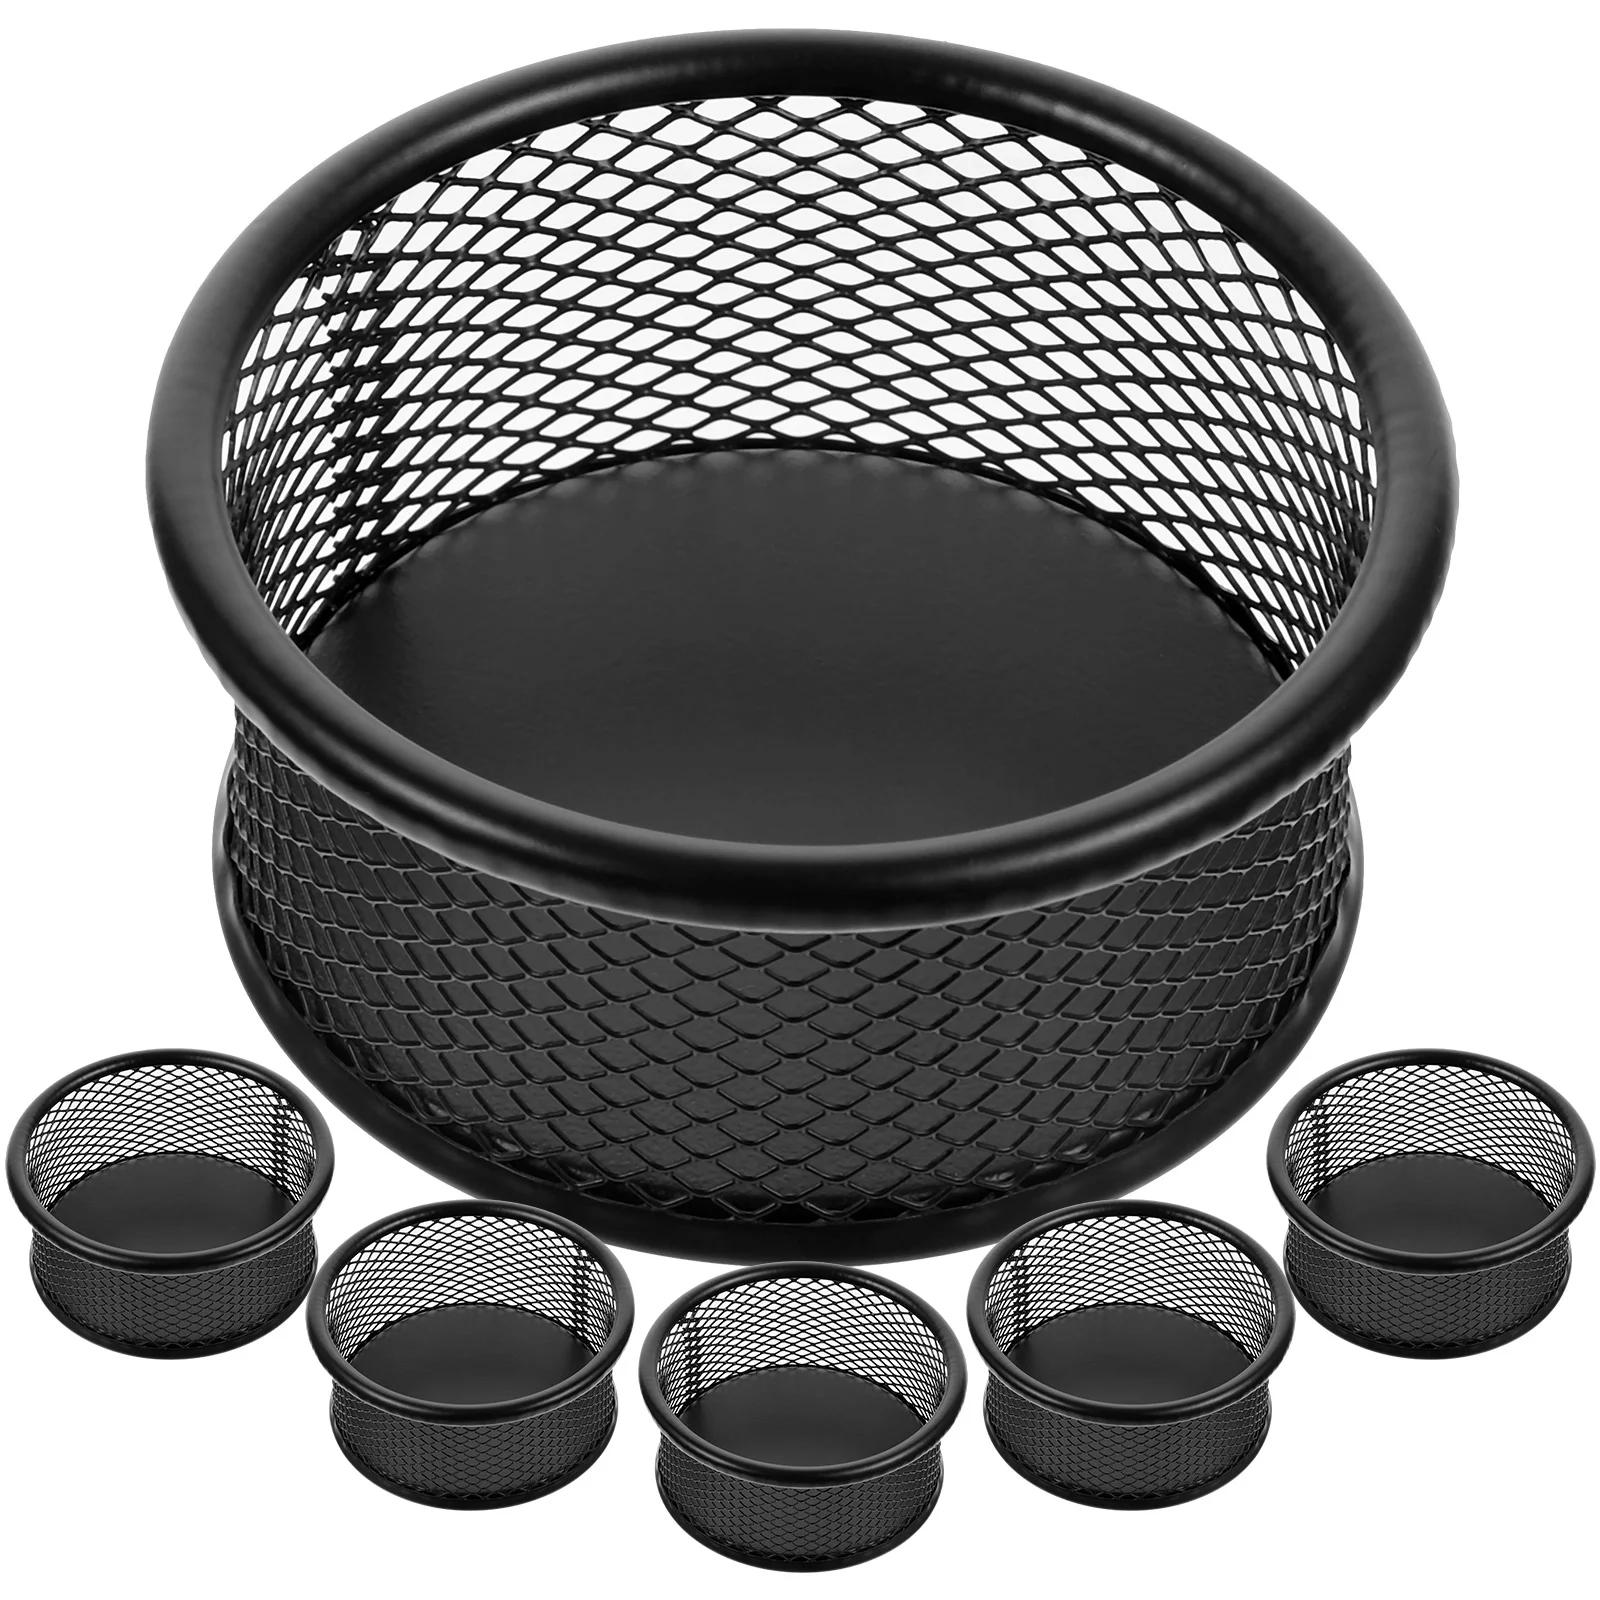 

Metal Grid Round Paper Clip Storage Holders Desk Containers Office for Clips Desktop Mesh Binder